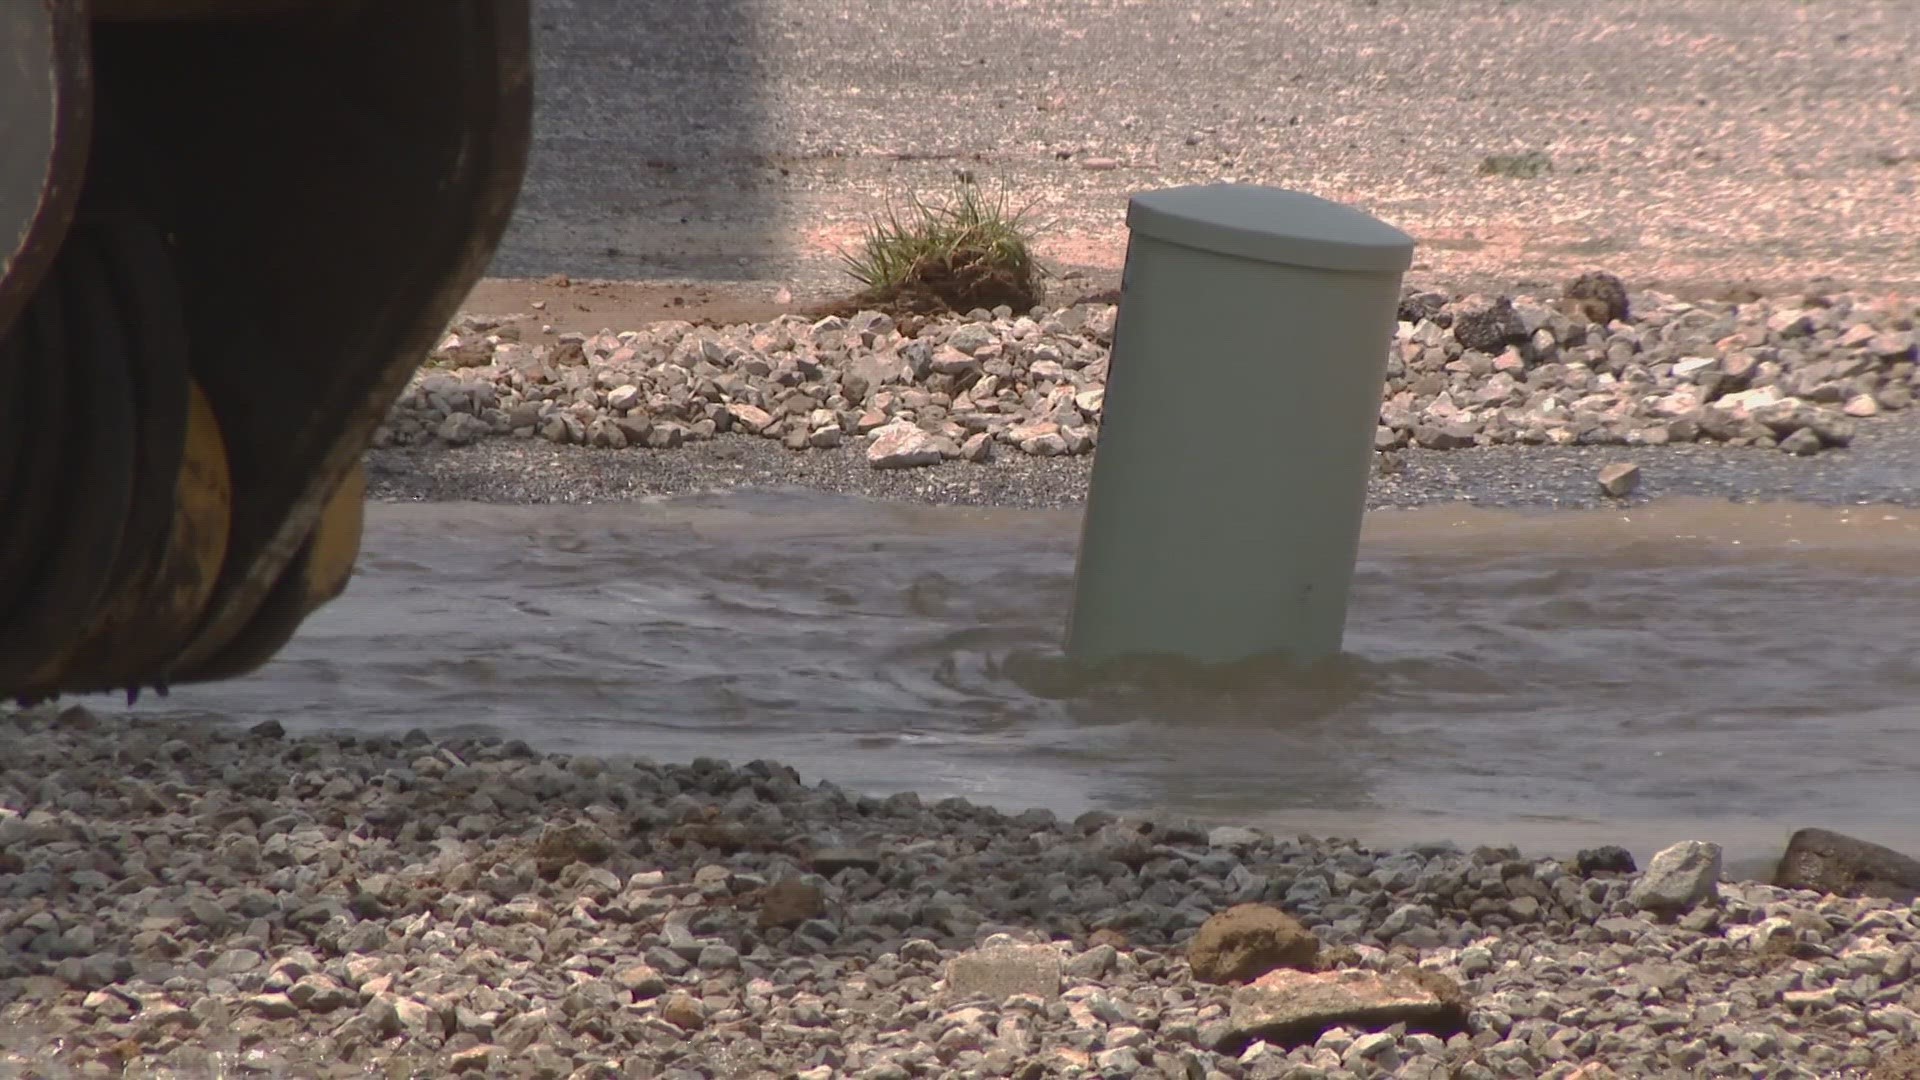 The bill comes after nearly 20 water main breaks within the city over the past few weeks. If passed, residents could see higher water bills as soon as next month.